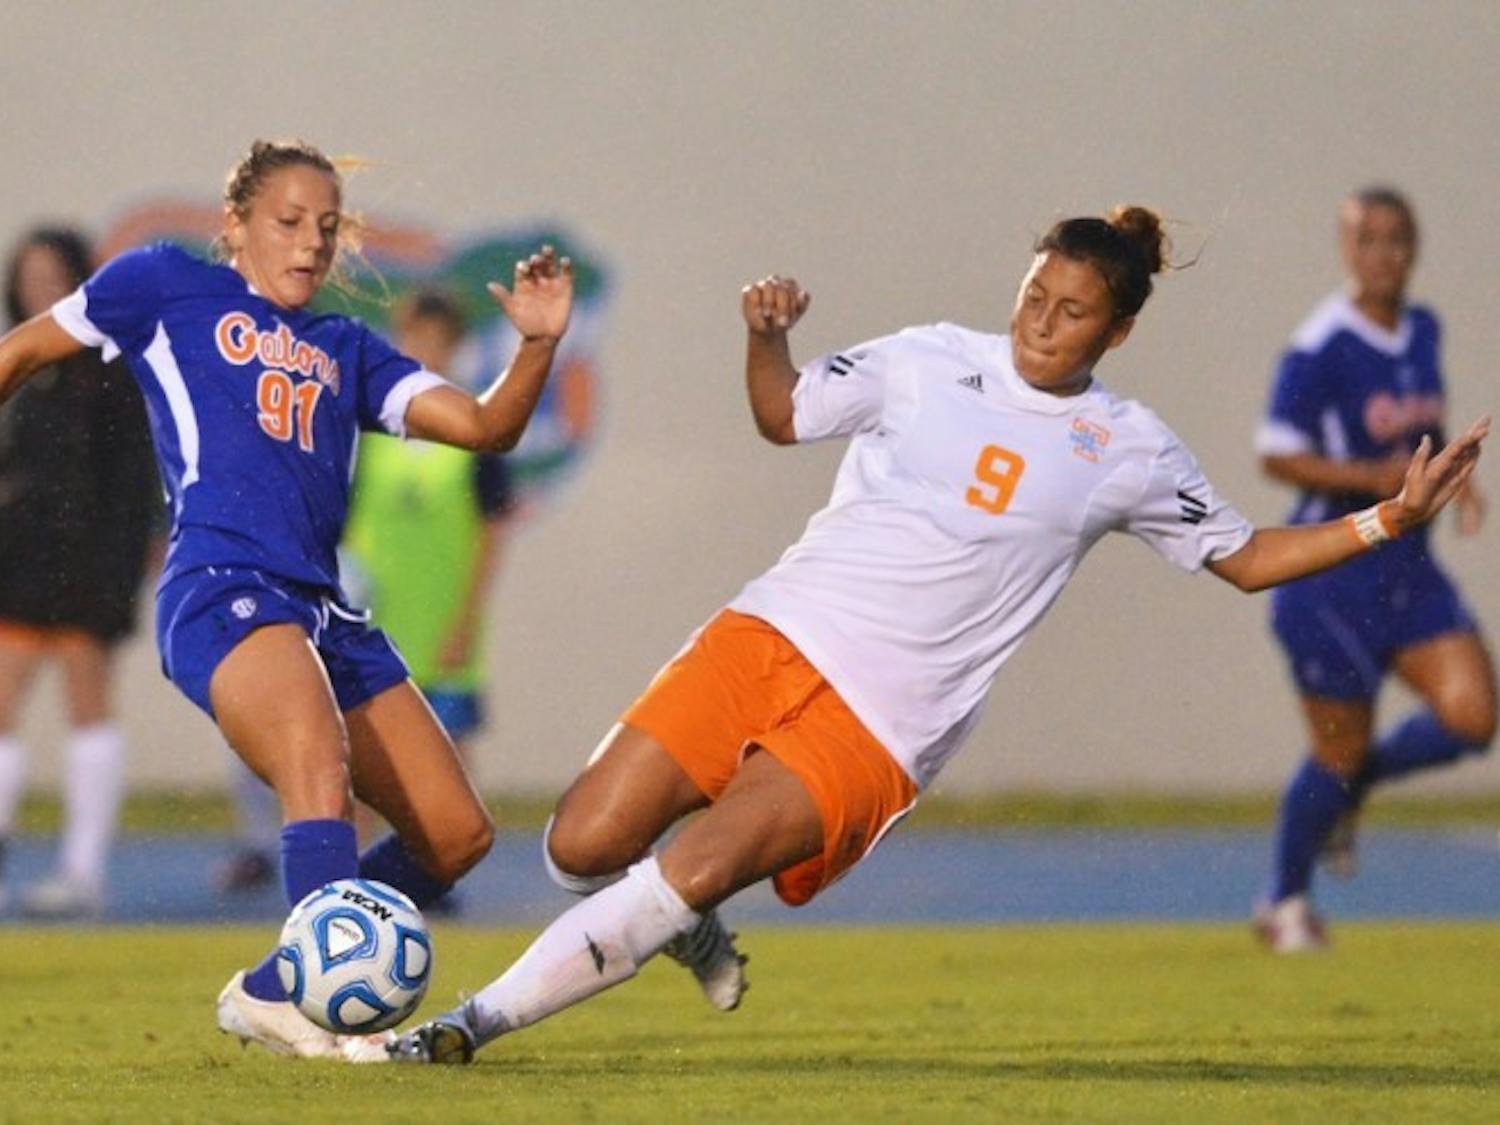 Junior forward Adriana Leon (91) fights for the ball with Tennessee’s Ali Hall (9) during UF’s 2-1 win on Sept. 21 at James G. Pressly Stadium. Despite playing in seven of Florida's 10 games, the junior is second on the team with 21 shots.